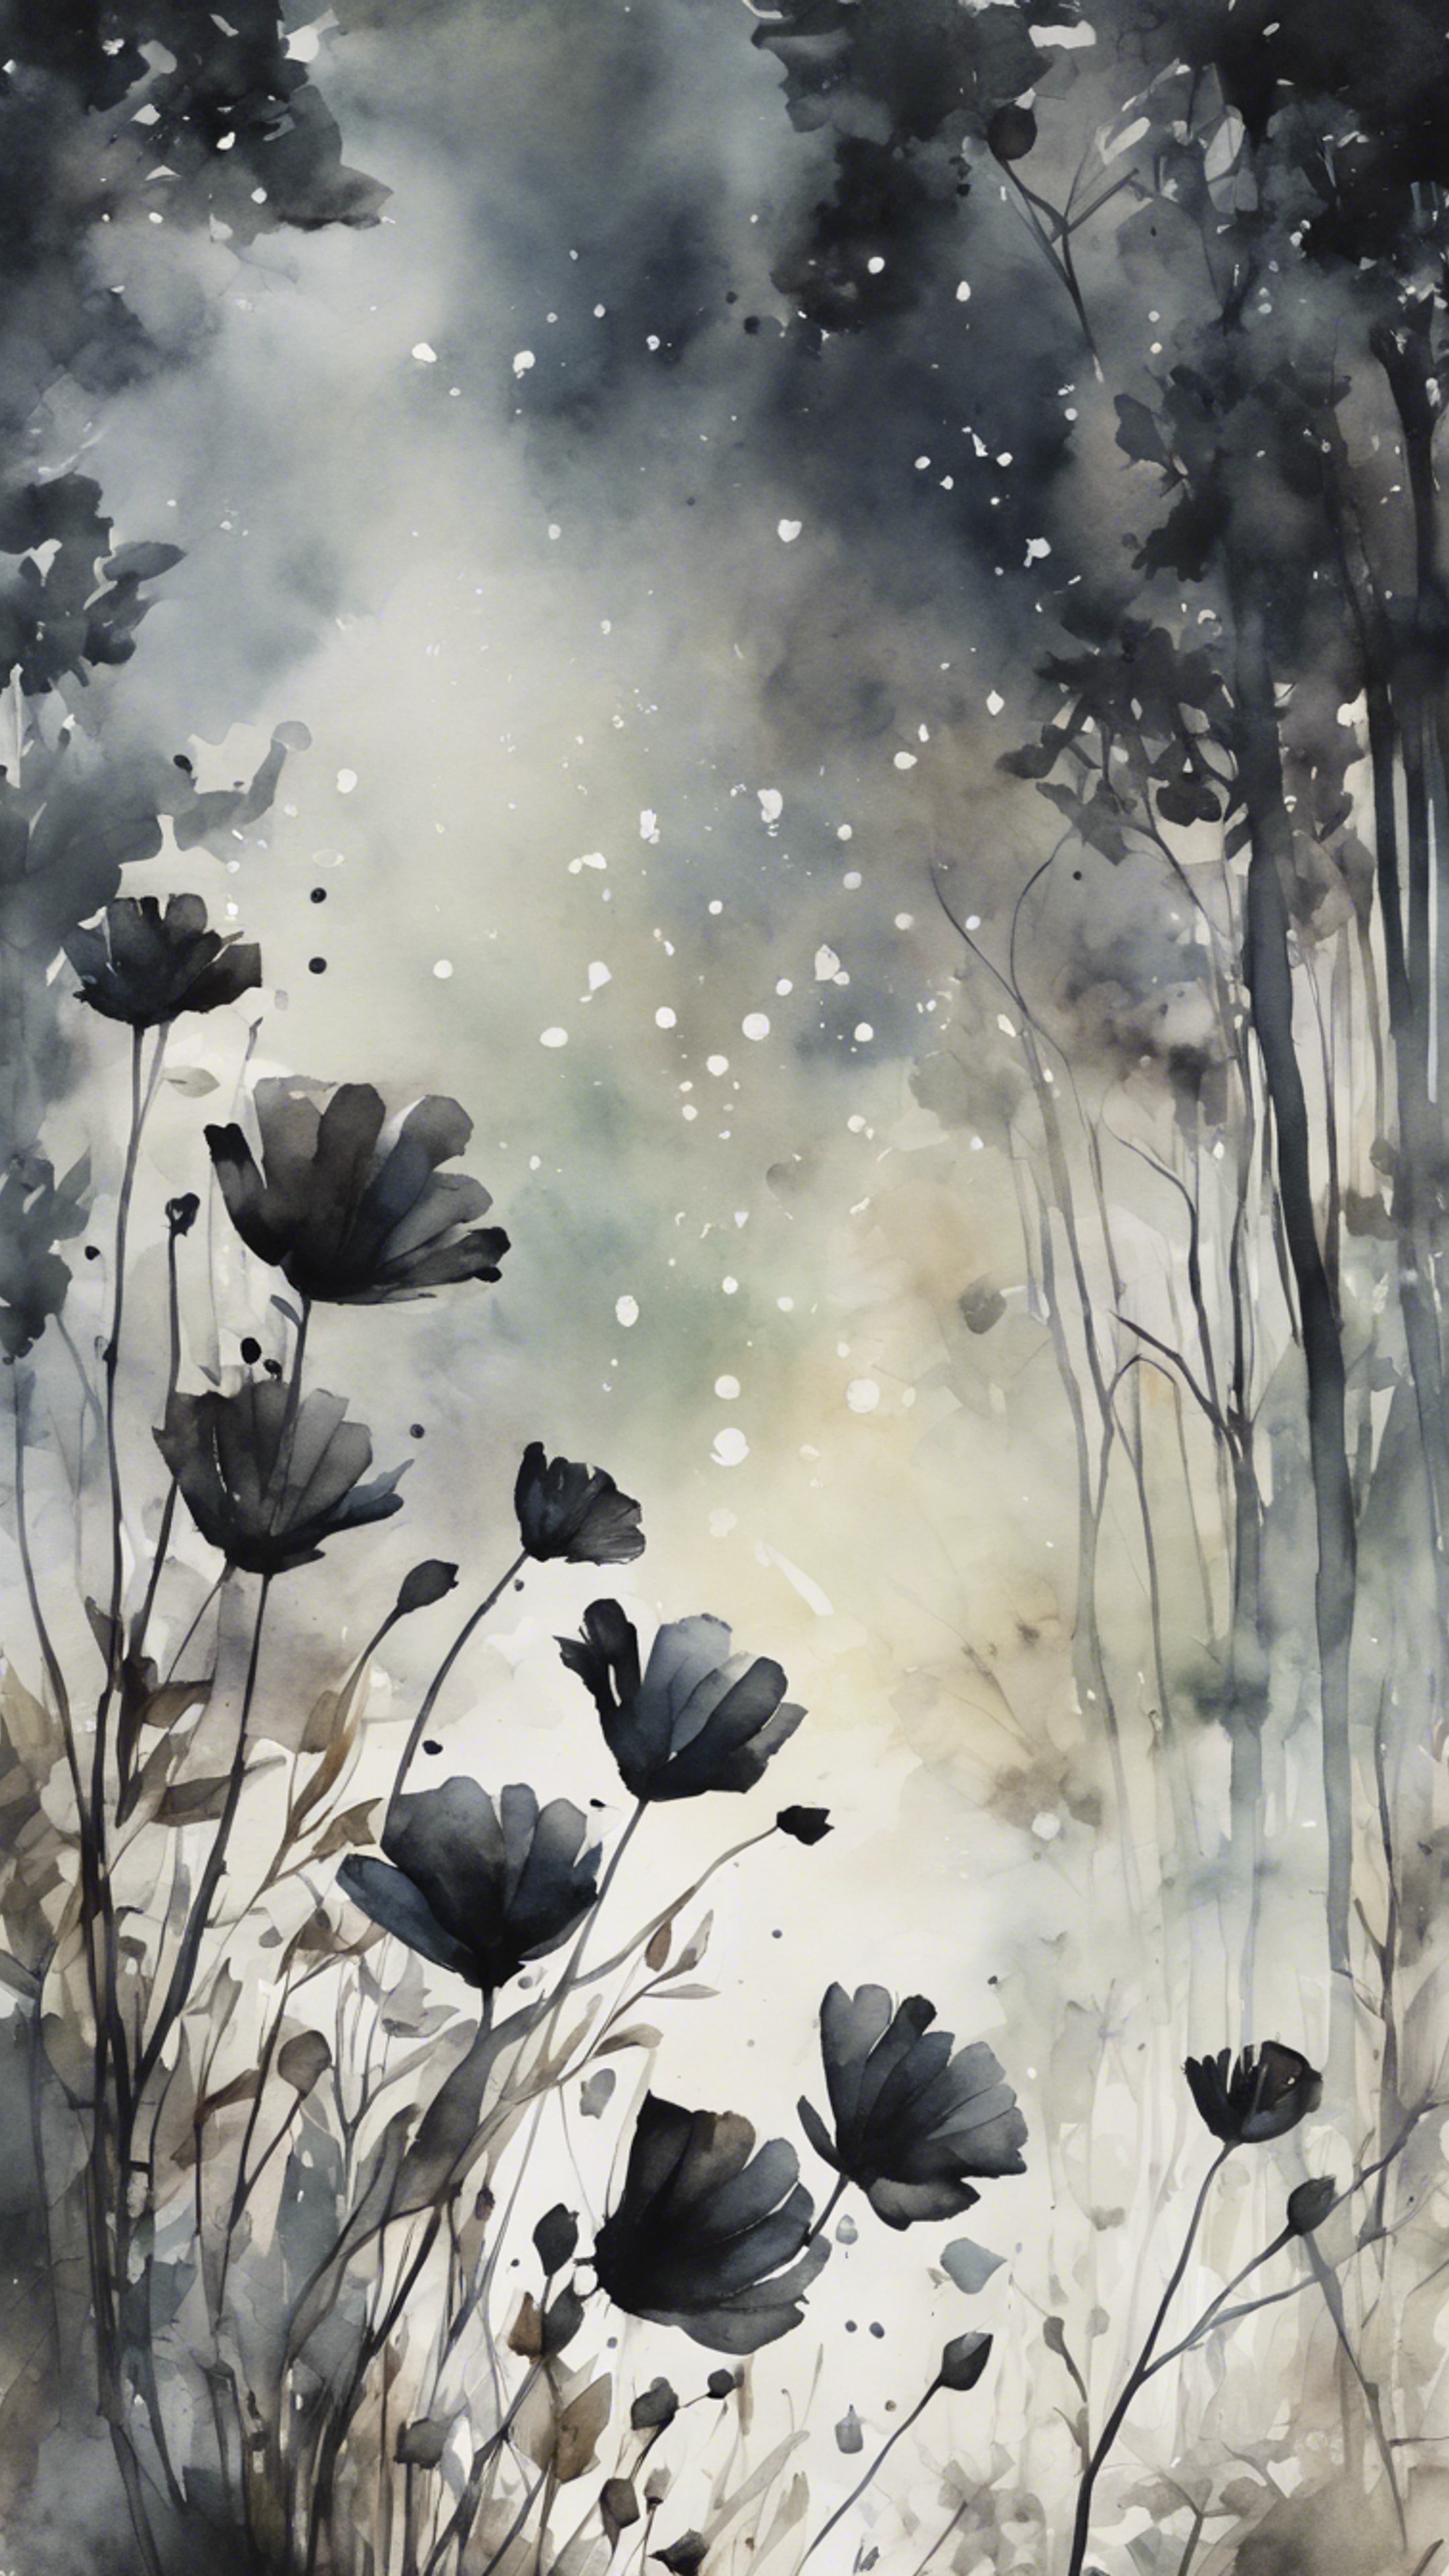 A dreamy watercolor painting depicting black flowers blooming in the heart of a dense forest. Шпалери[006f57e6dd8144ebb2db]